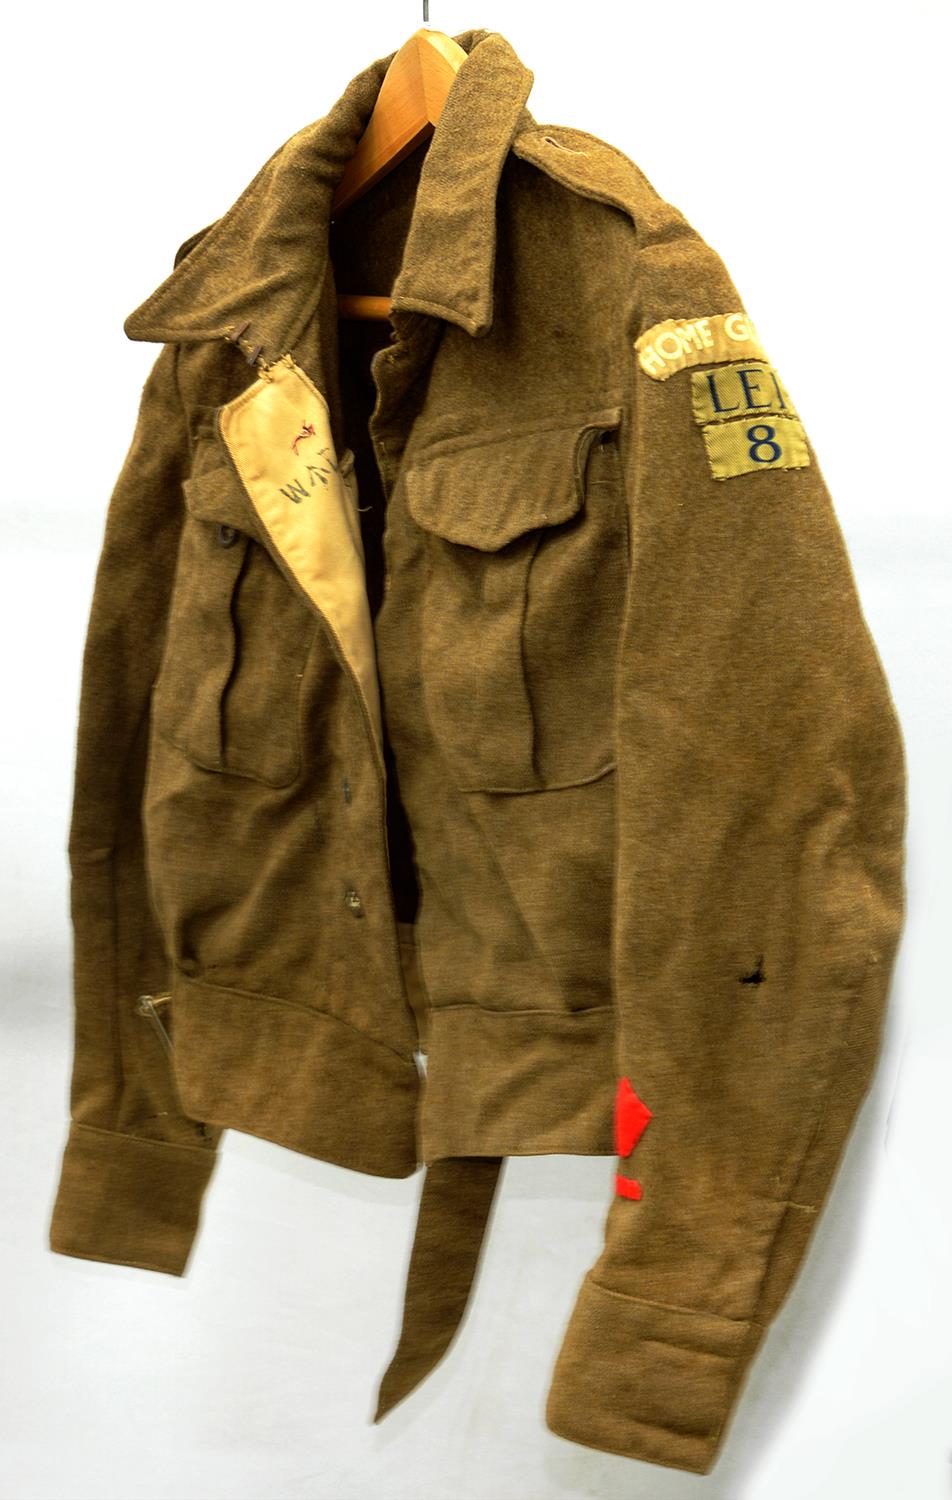 WORLD WAR TWO. BRITISH HOME GUARD KHAKI SERGE BLOUSE WITH CLOTH INSIGNIA INCLUDING LEI/8